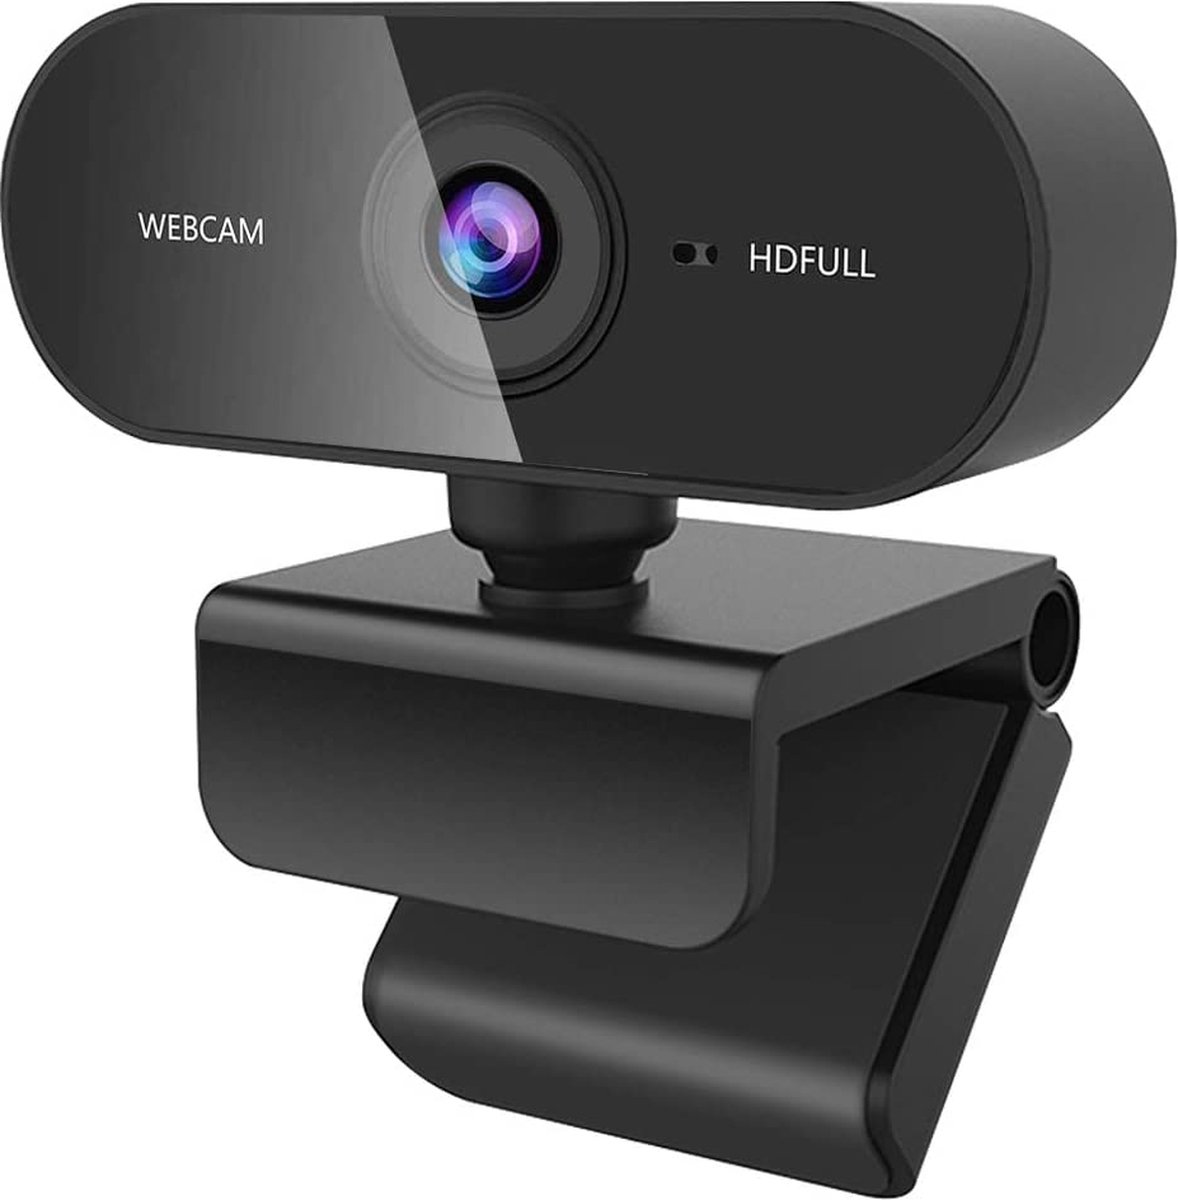 Dewanxin Webcam, USB Full HD 1080P Webcam with Noise Cancelling Microphone PC Laptop Desktop Webcam with 360° Rotating Base Plug & Play for Video Calls, Live Streaming, Games and Conferences